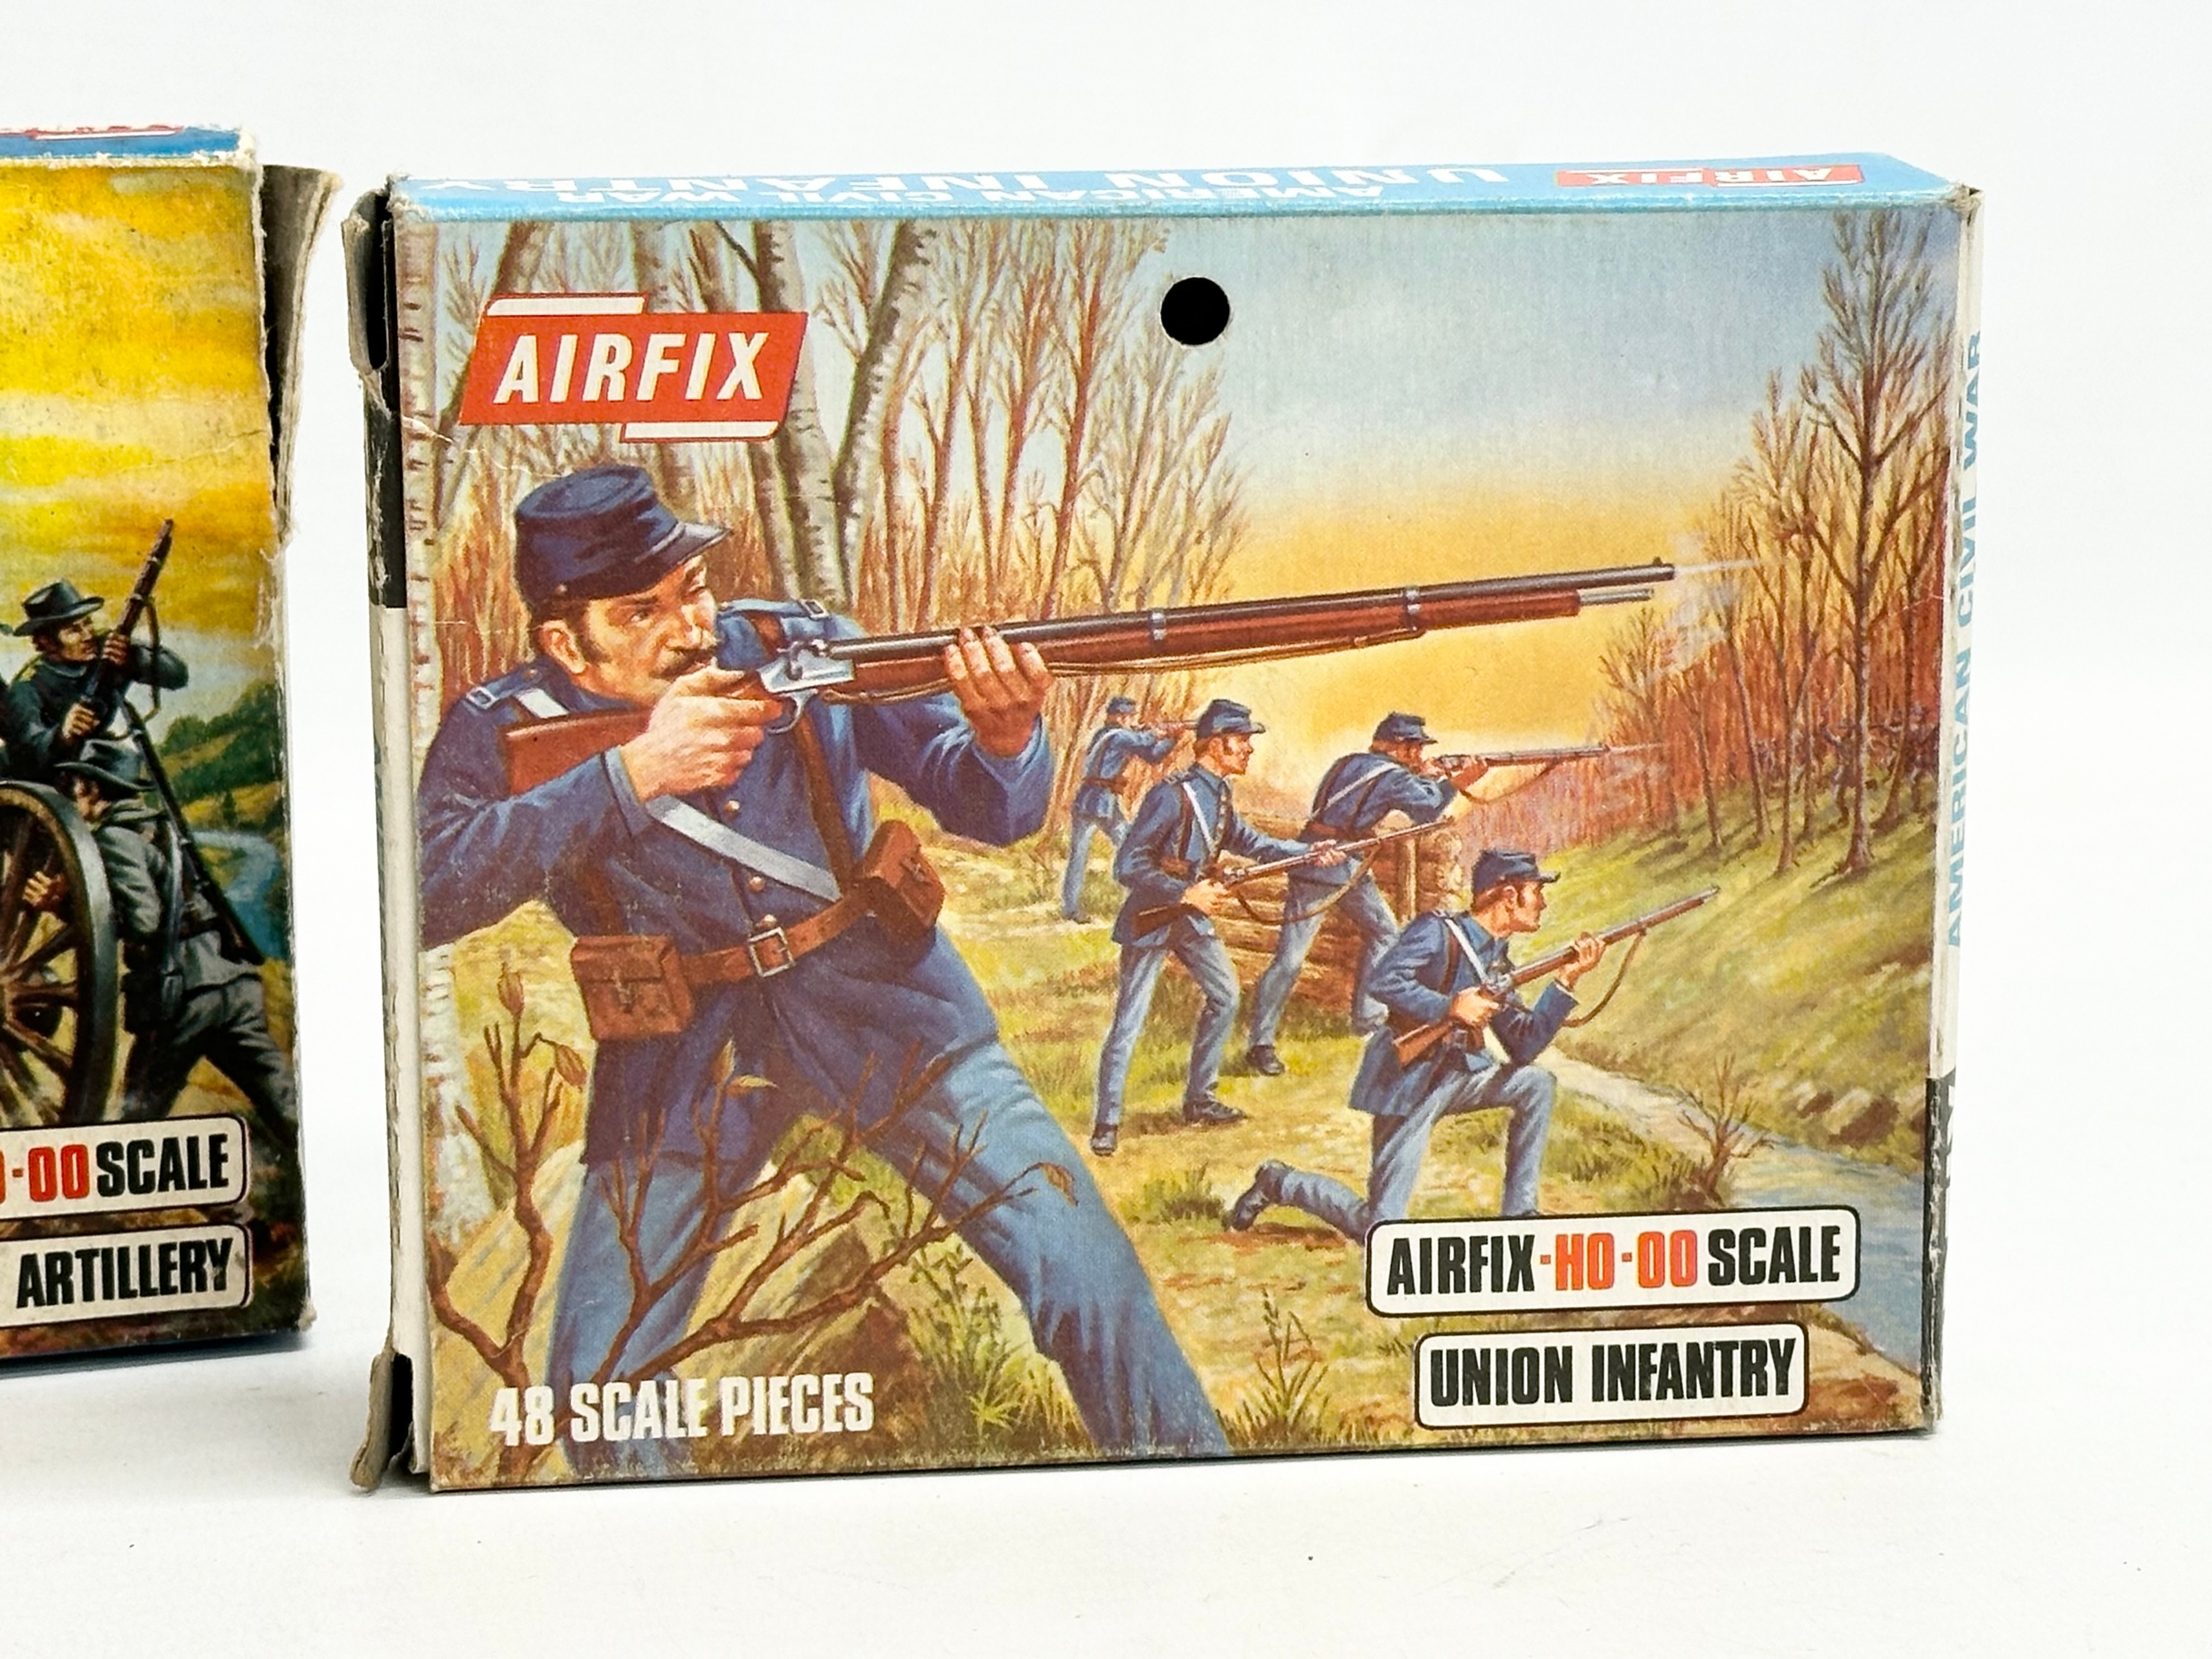 3 boxes of vintage Airfix HO-OO scale soldiers. Airfix Union Infantry. Airfix Civil War Artillery. - Image 2 of 4